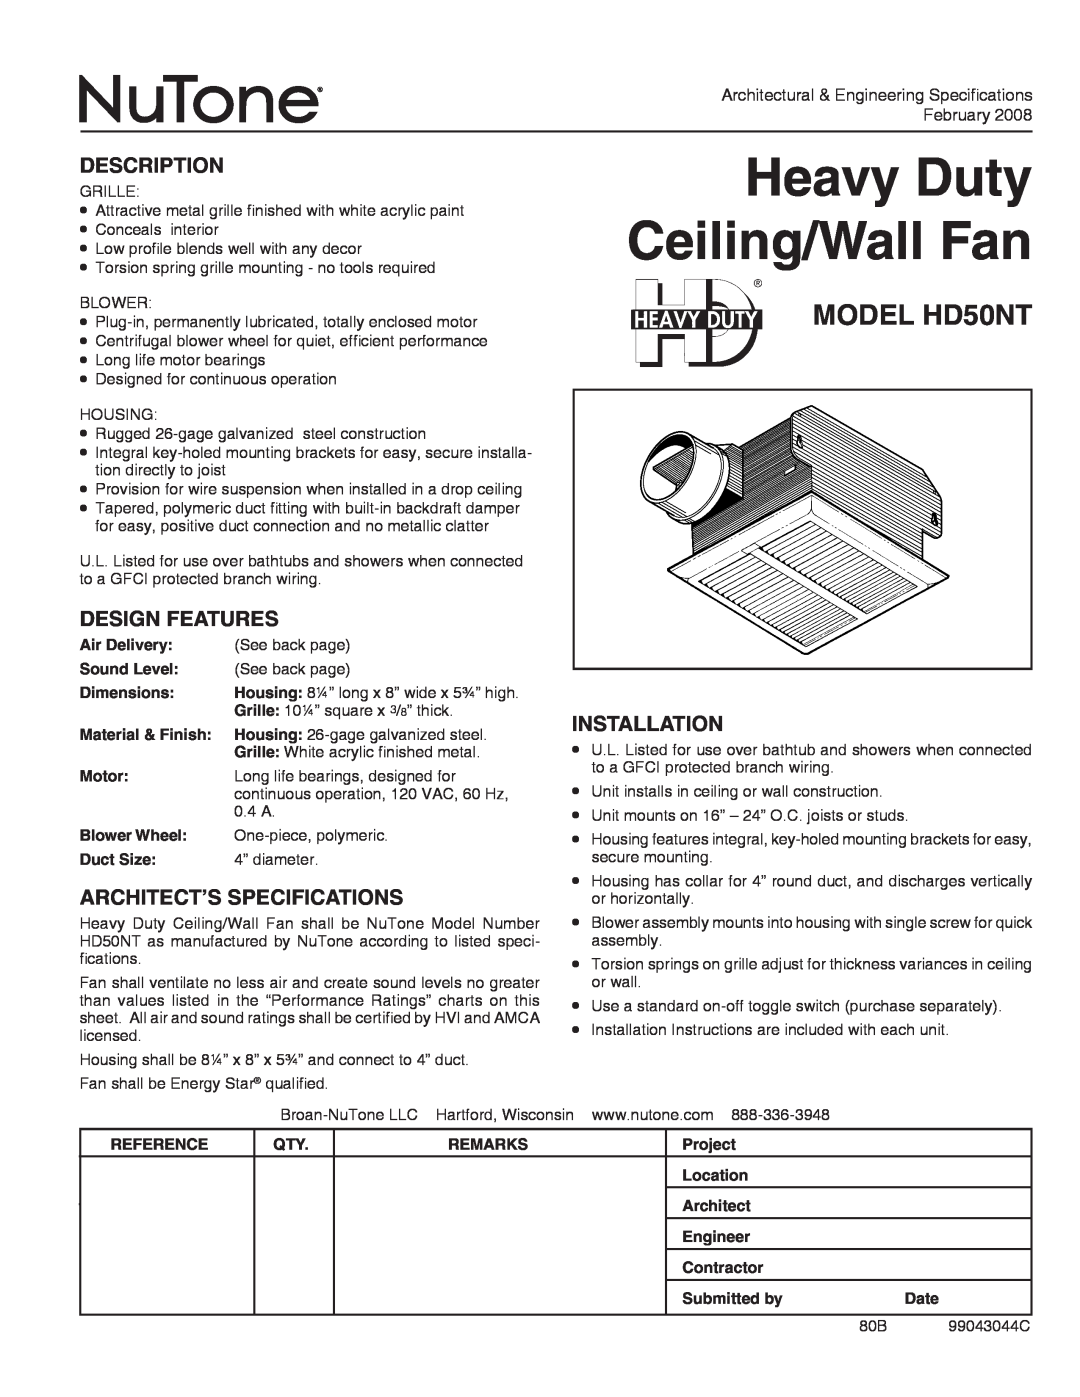 NuTone dimensions Heavy Duty Ceiling/Wall Fan, MODEL HD50NT, Description, Design Features, Architect’S Specifications 